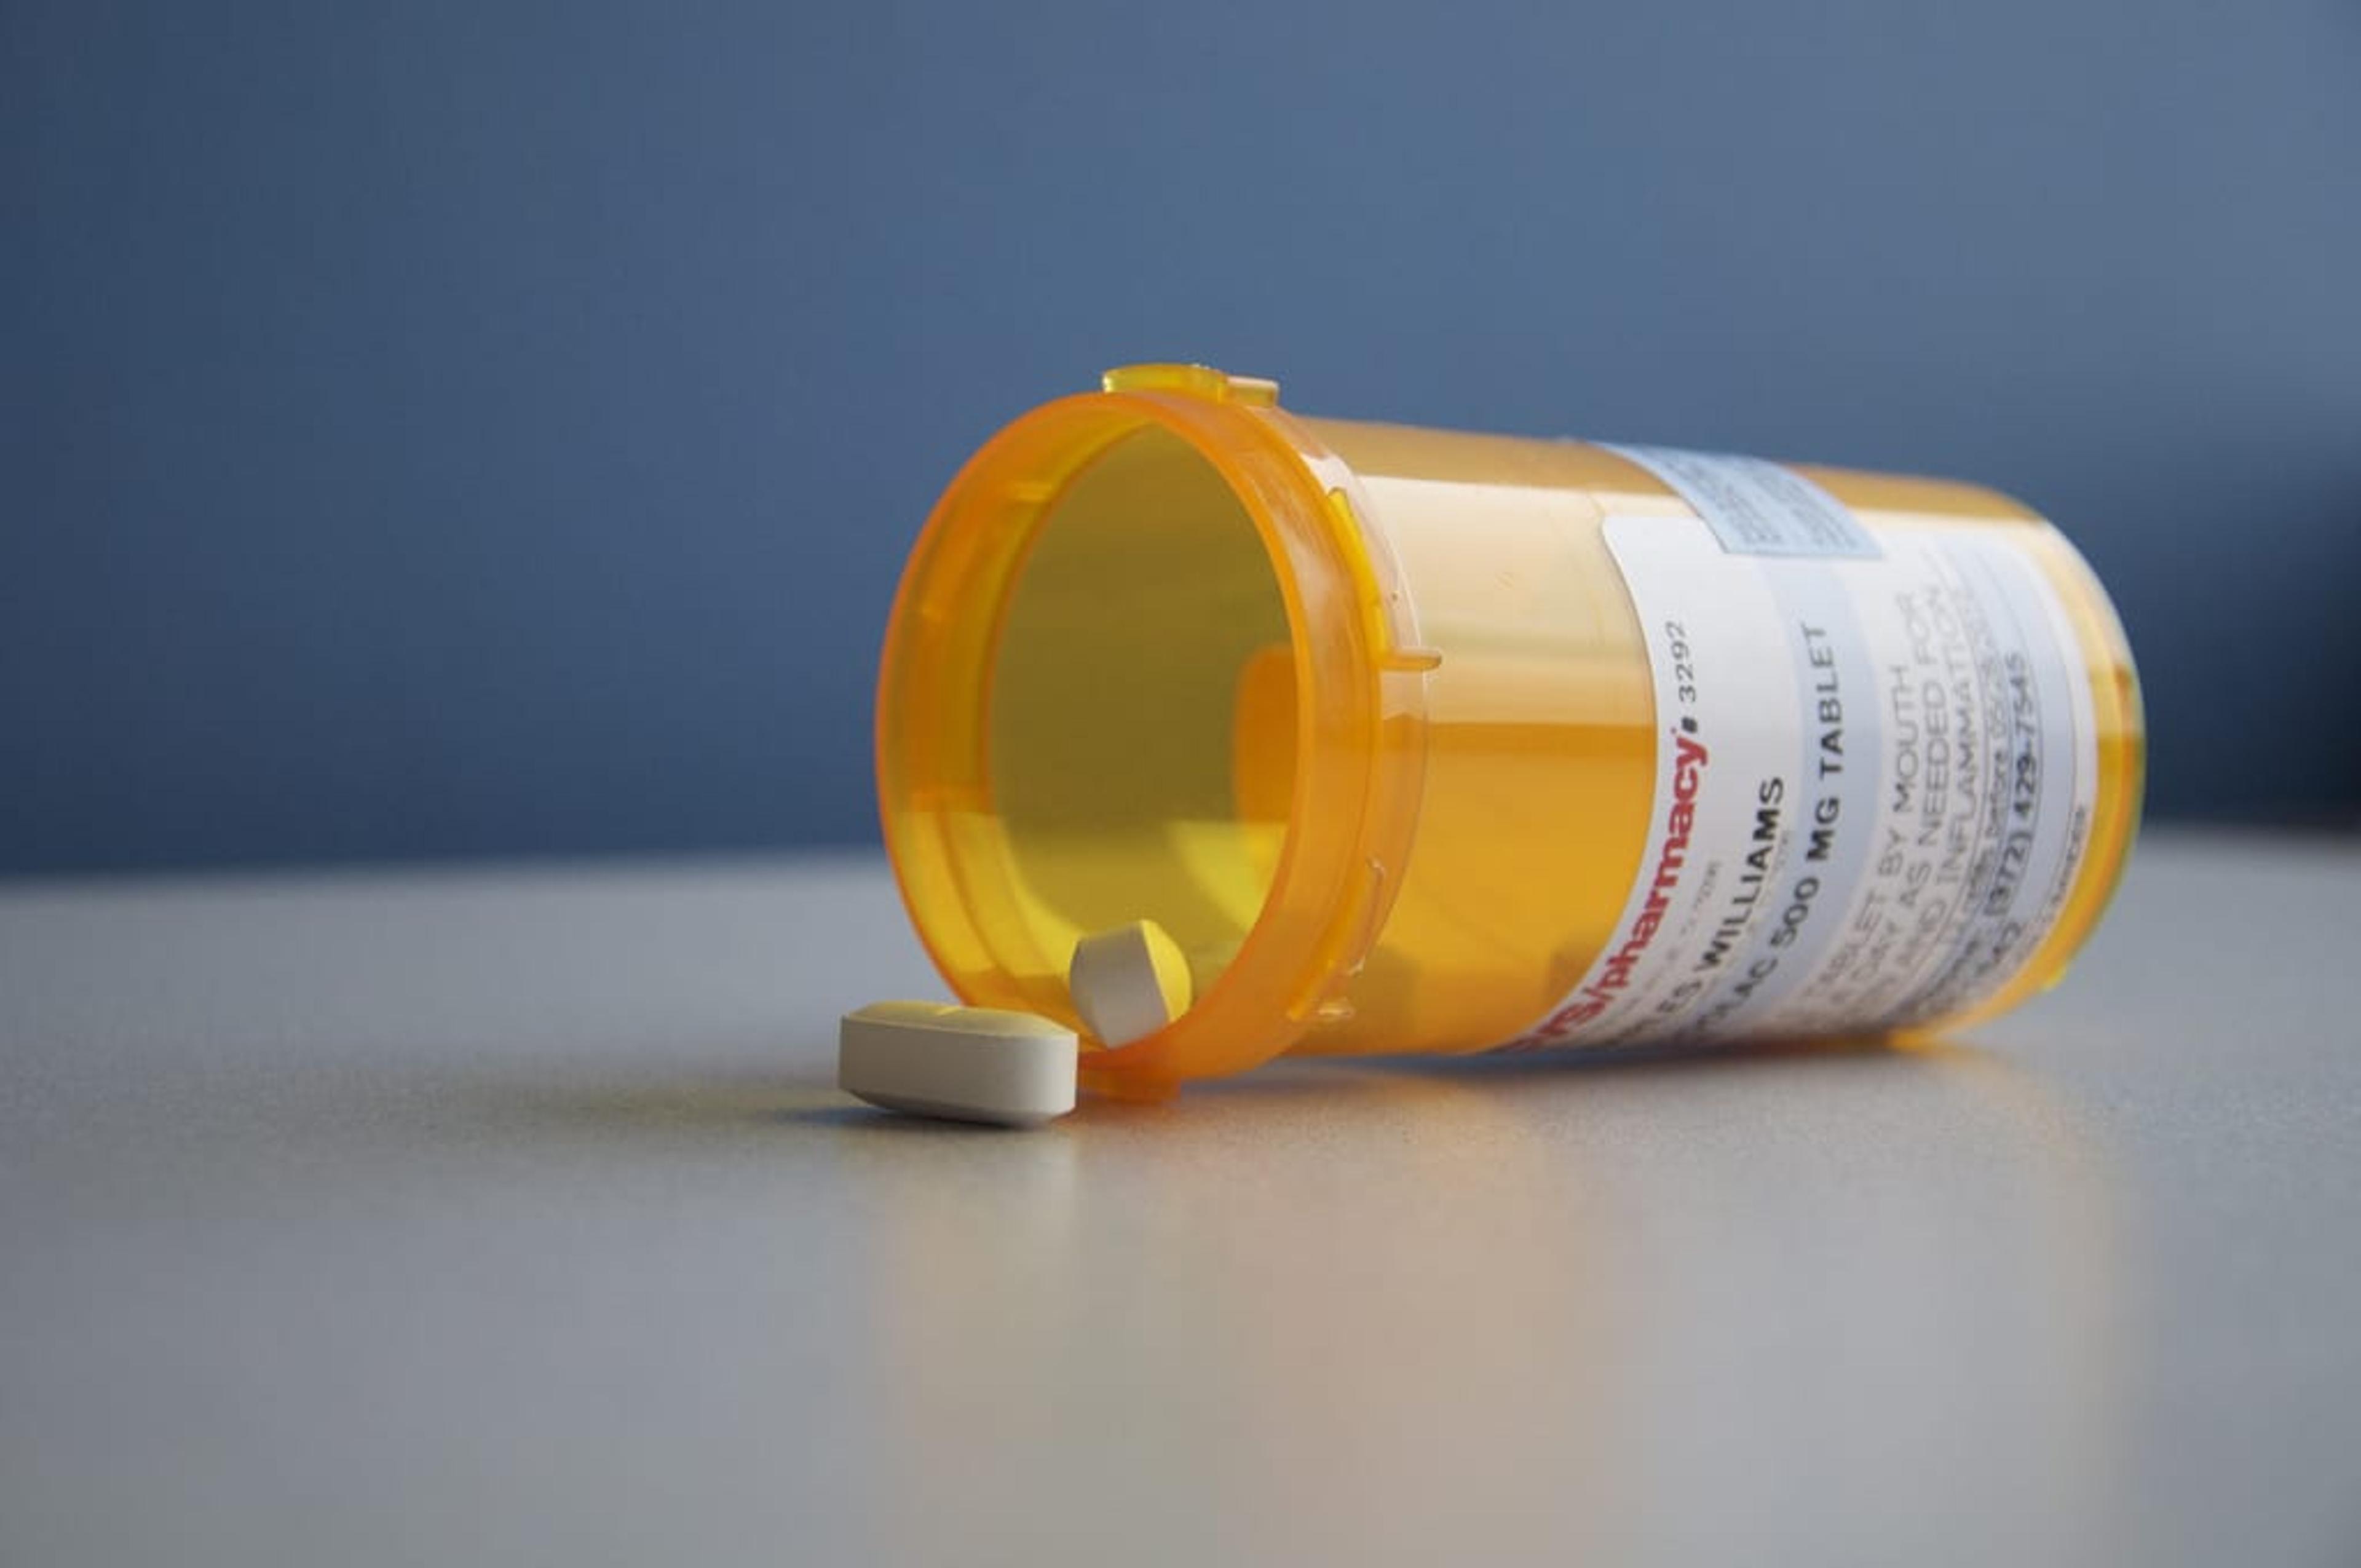 Image of a prescription medication bottled tipped on its side with pills spilling out on table.